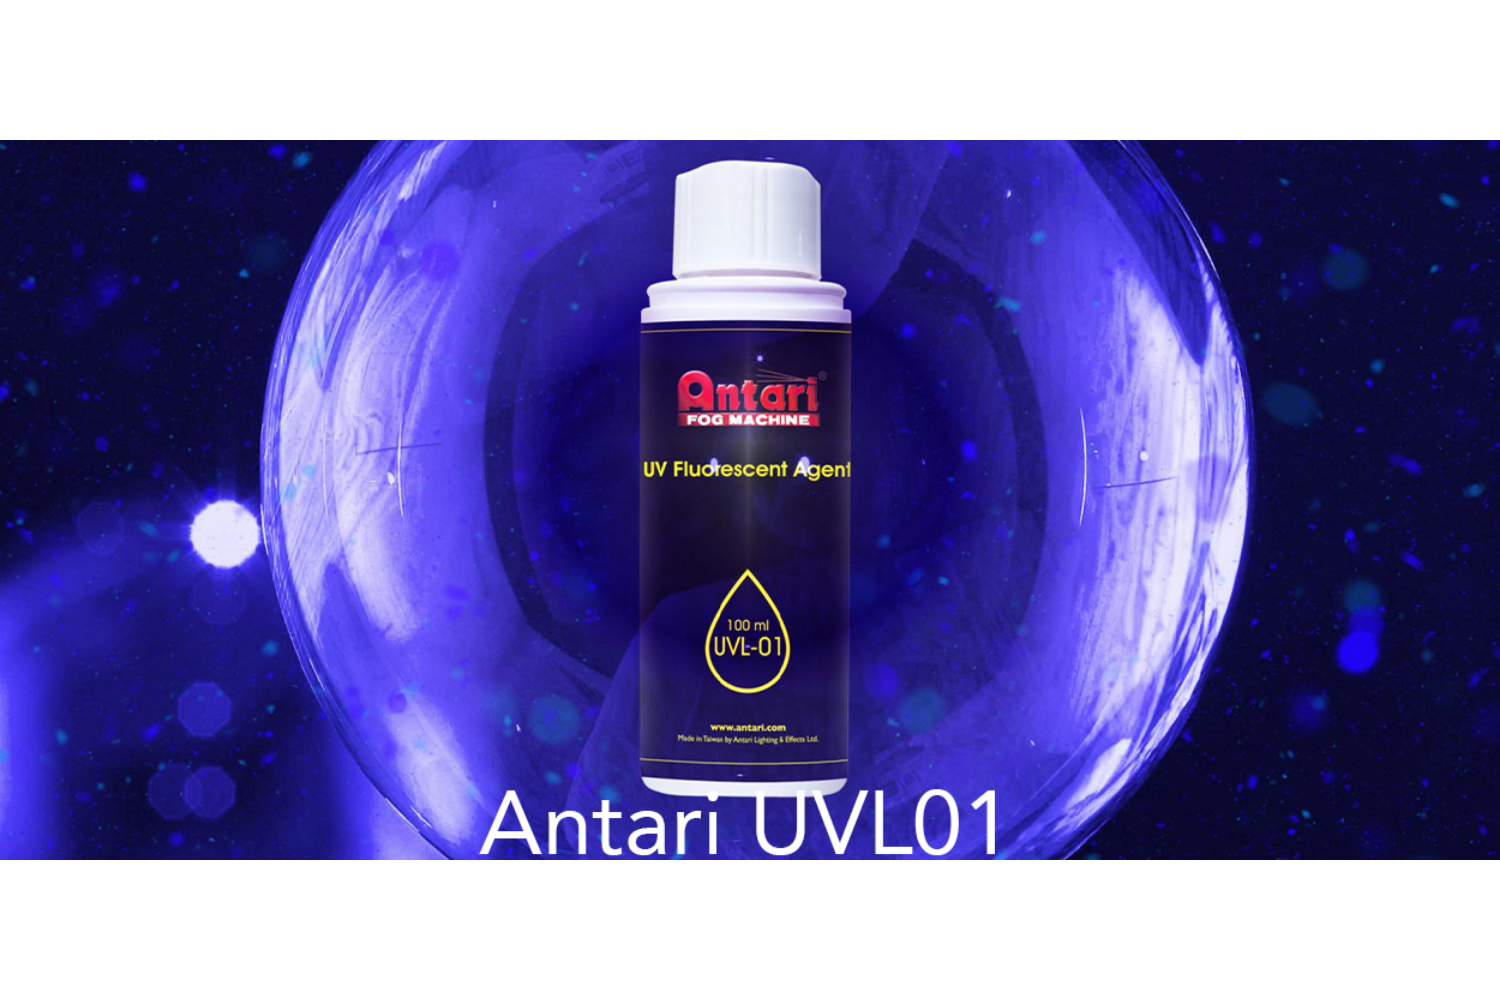 New FX Consumable Just landed! Antari UVL01 UV Fluorescent Agent! In Stock Now!